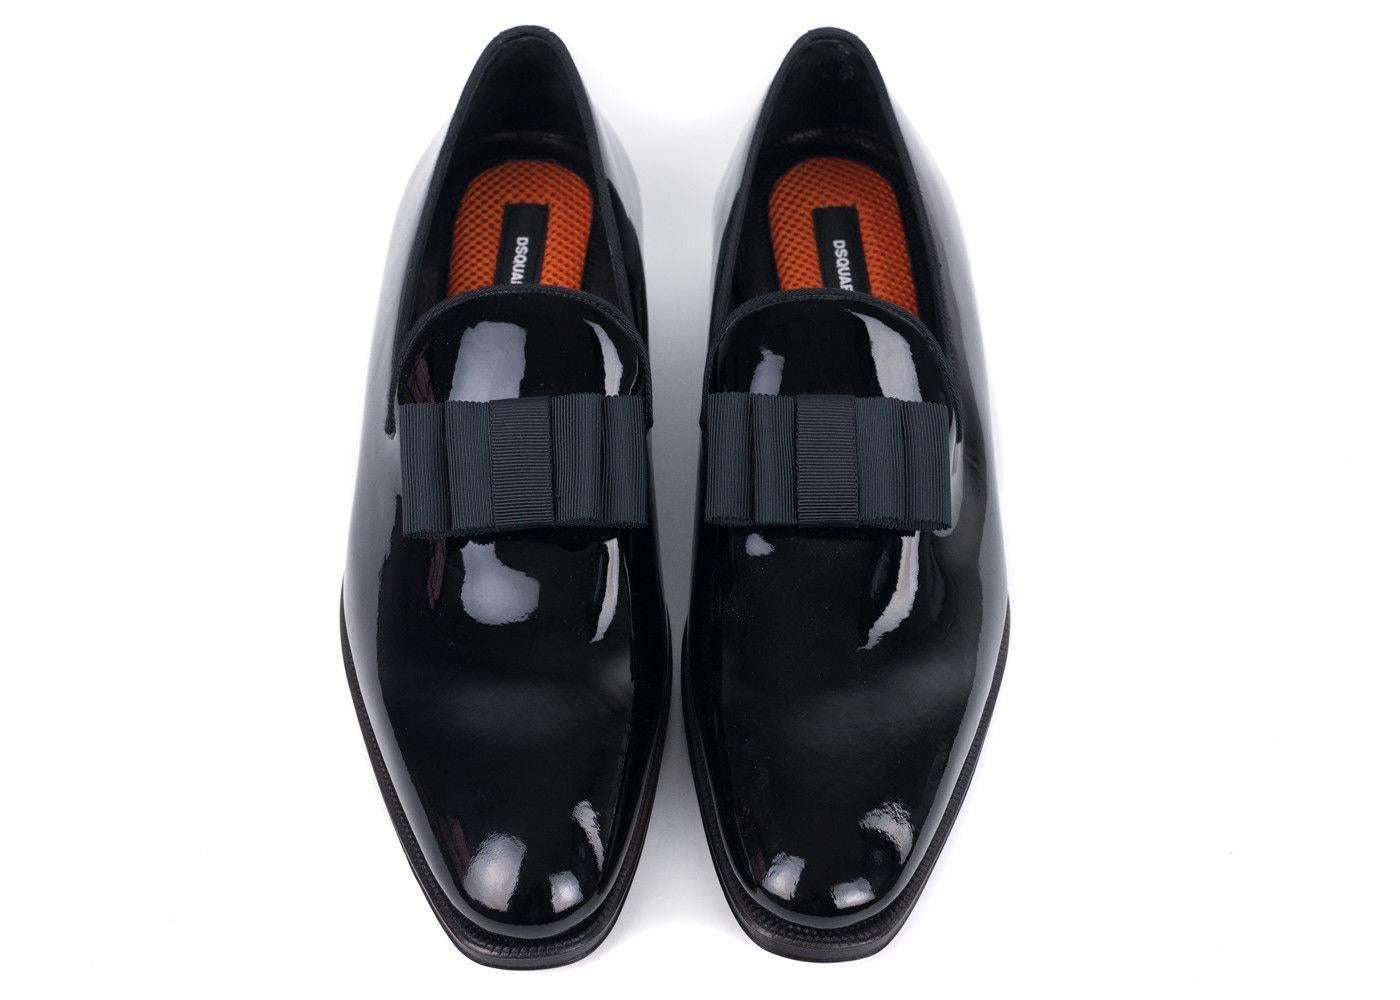 
DSquared2 black patent leather tuxedo loafers for those extra special occasions. Dsquared2 takes on a classic pair of tuxedo loafers that are traditional and worn for special events. Very sophisticated and fitting to pair with an all black tuxedo